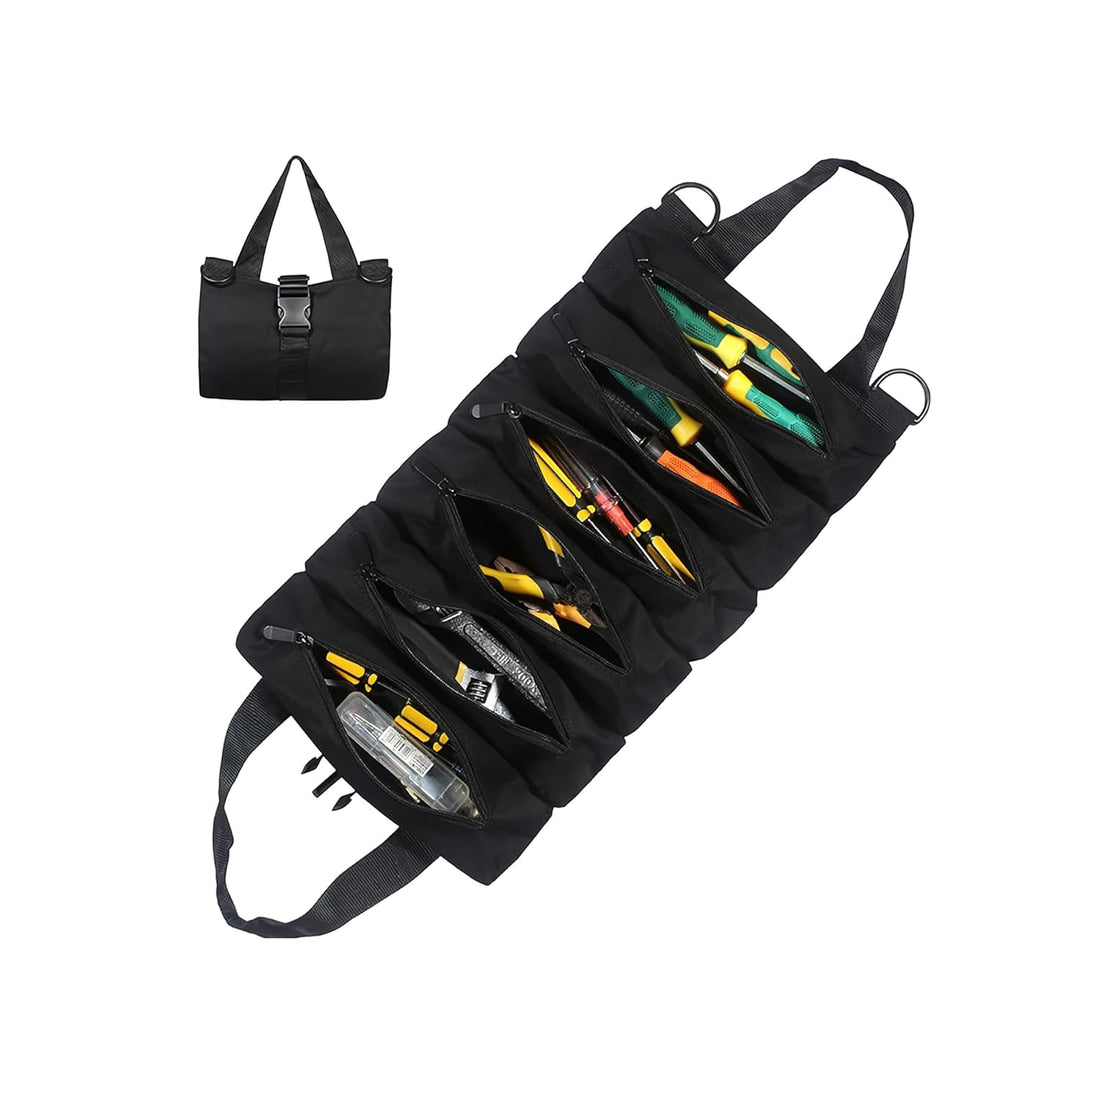 Roll Up Tool Bag Organizer - Compact and Portable Tool Pouch for Easy Storage and Transport - Ideal for tool pouch and Other Tool Bags. (Black)